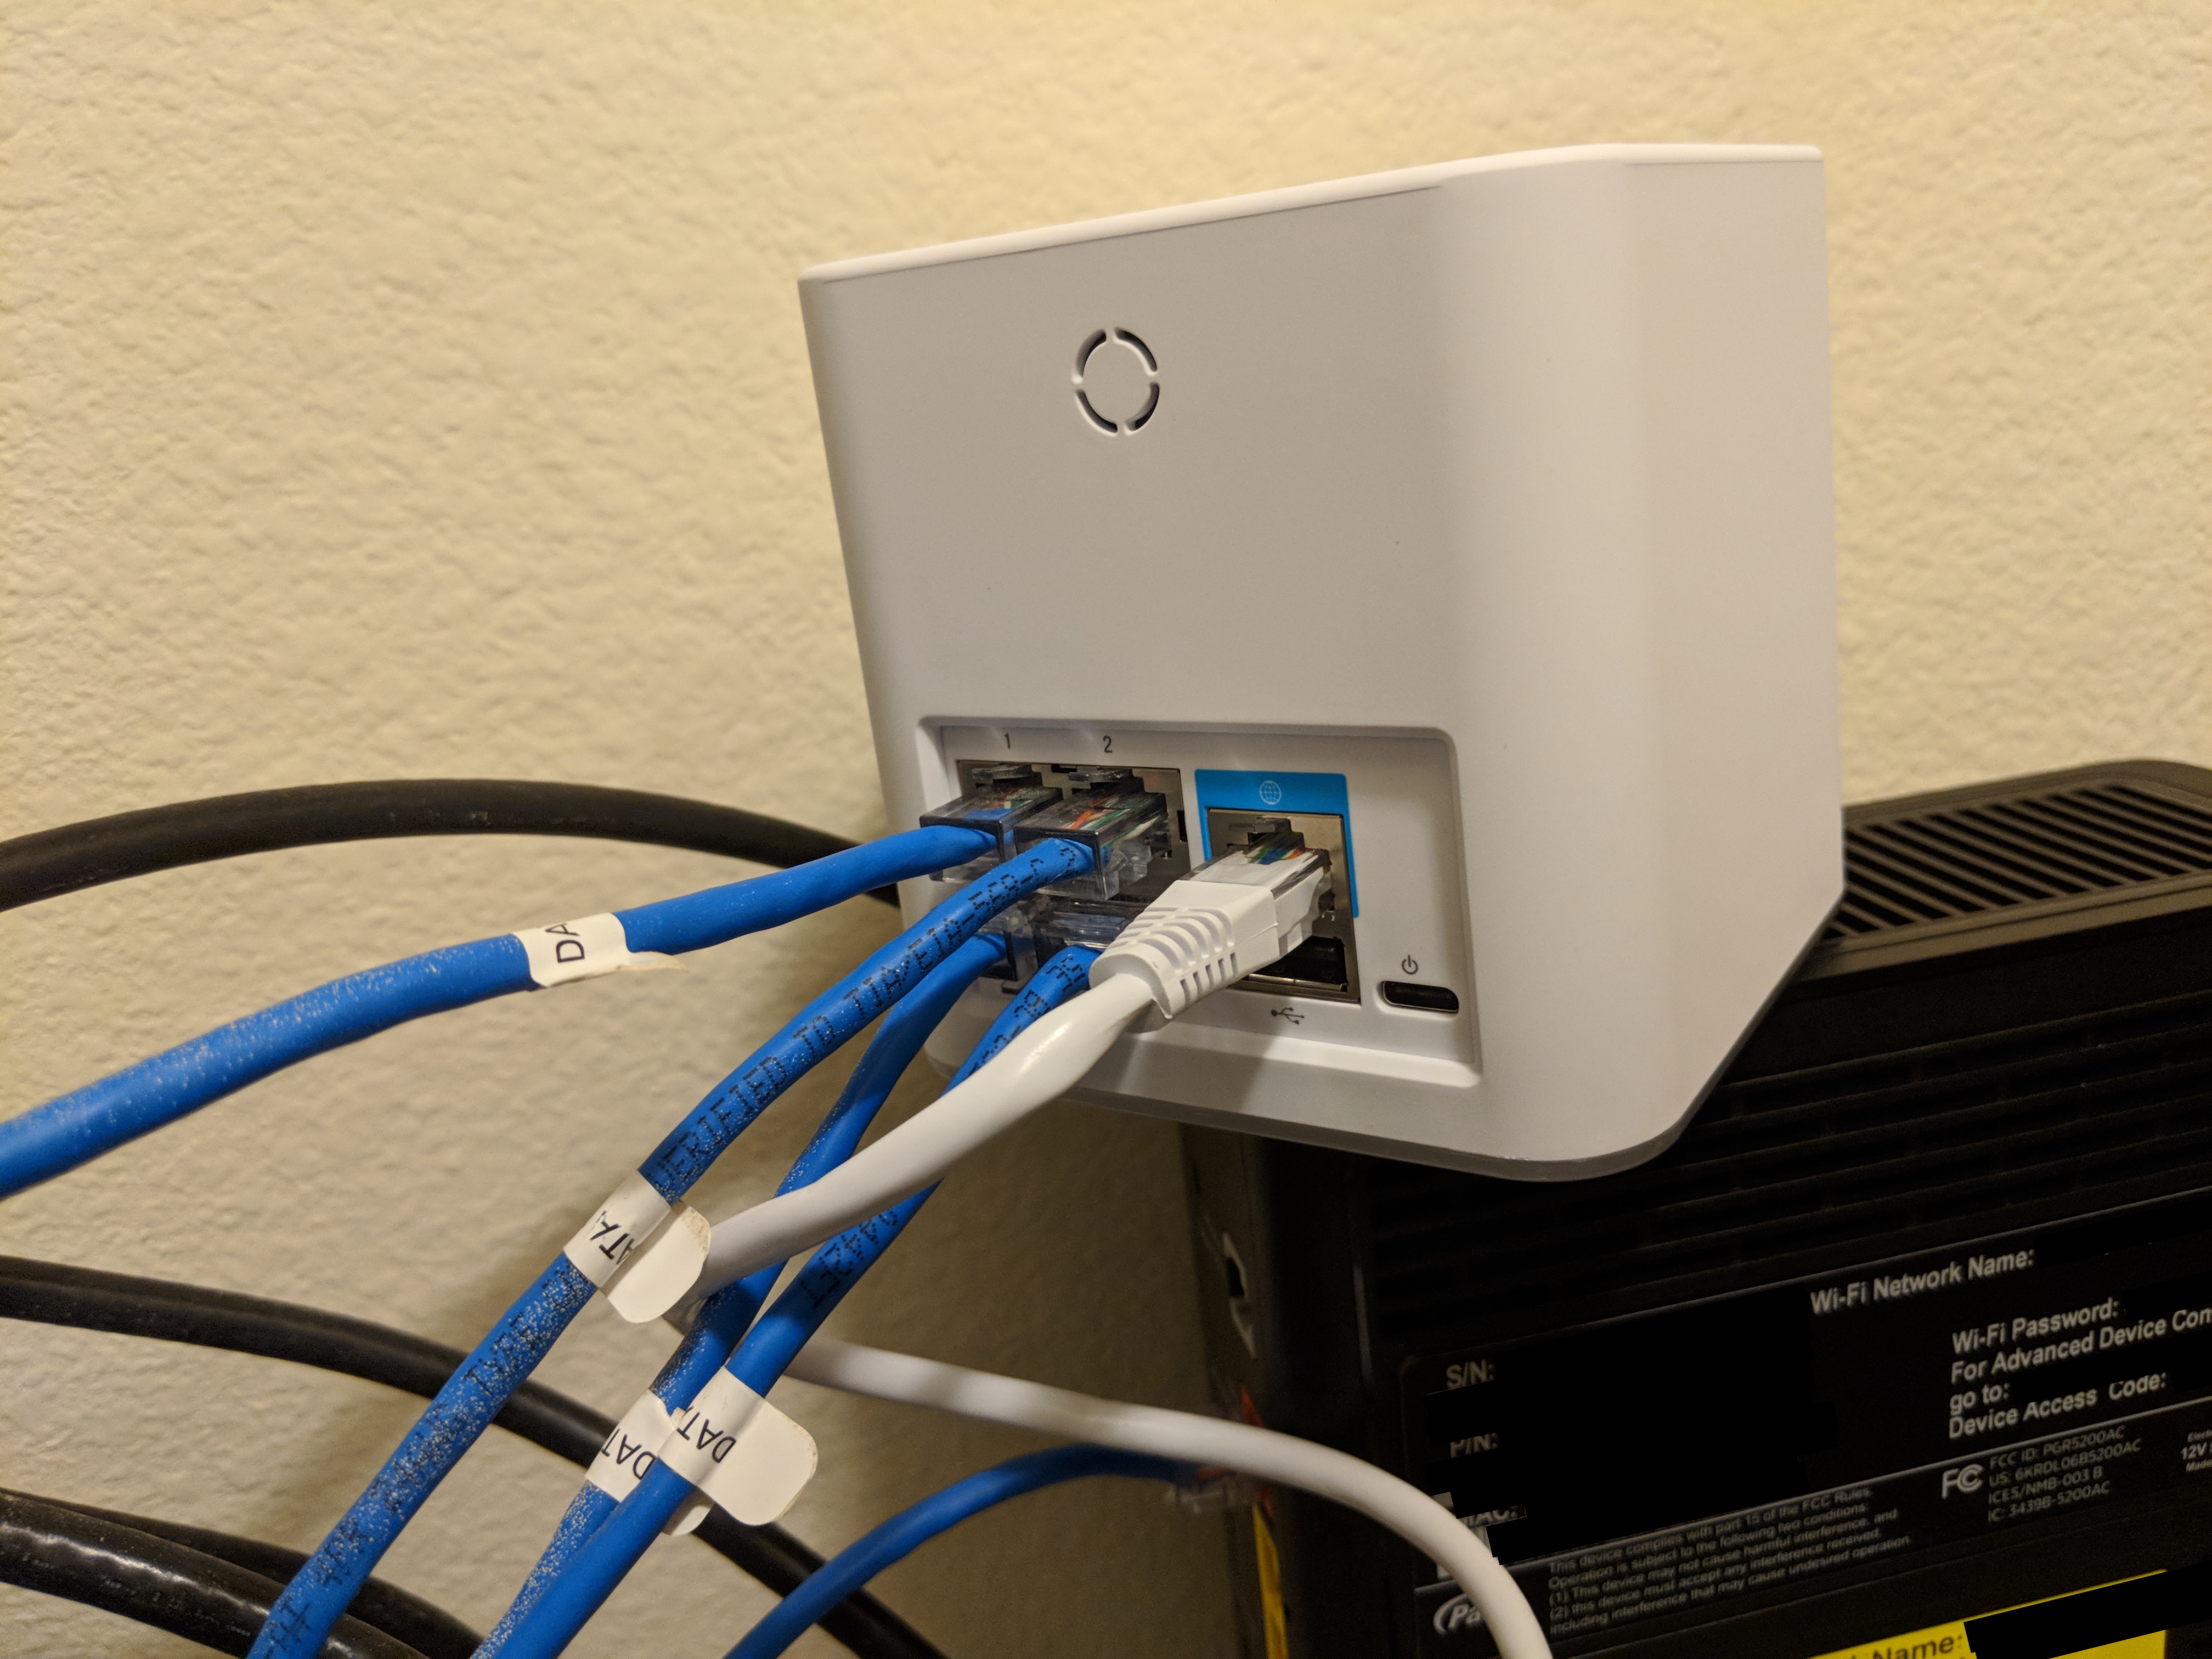 Hooking up the AmpliFi HD